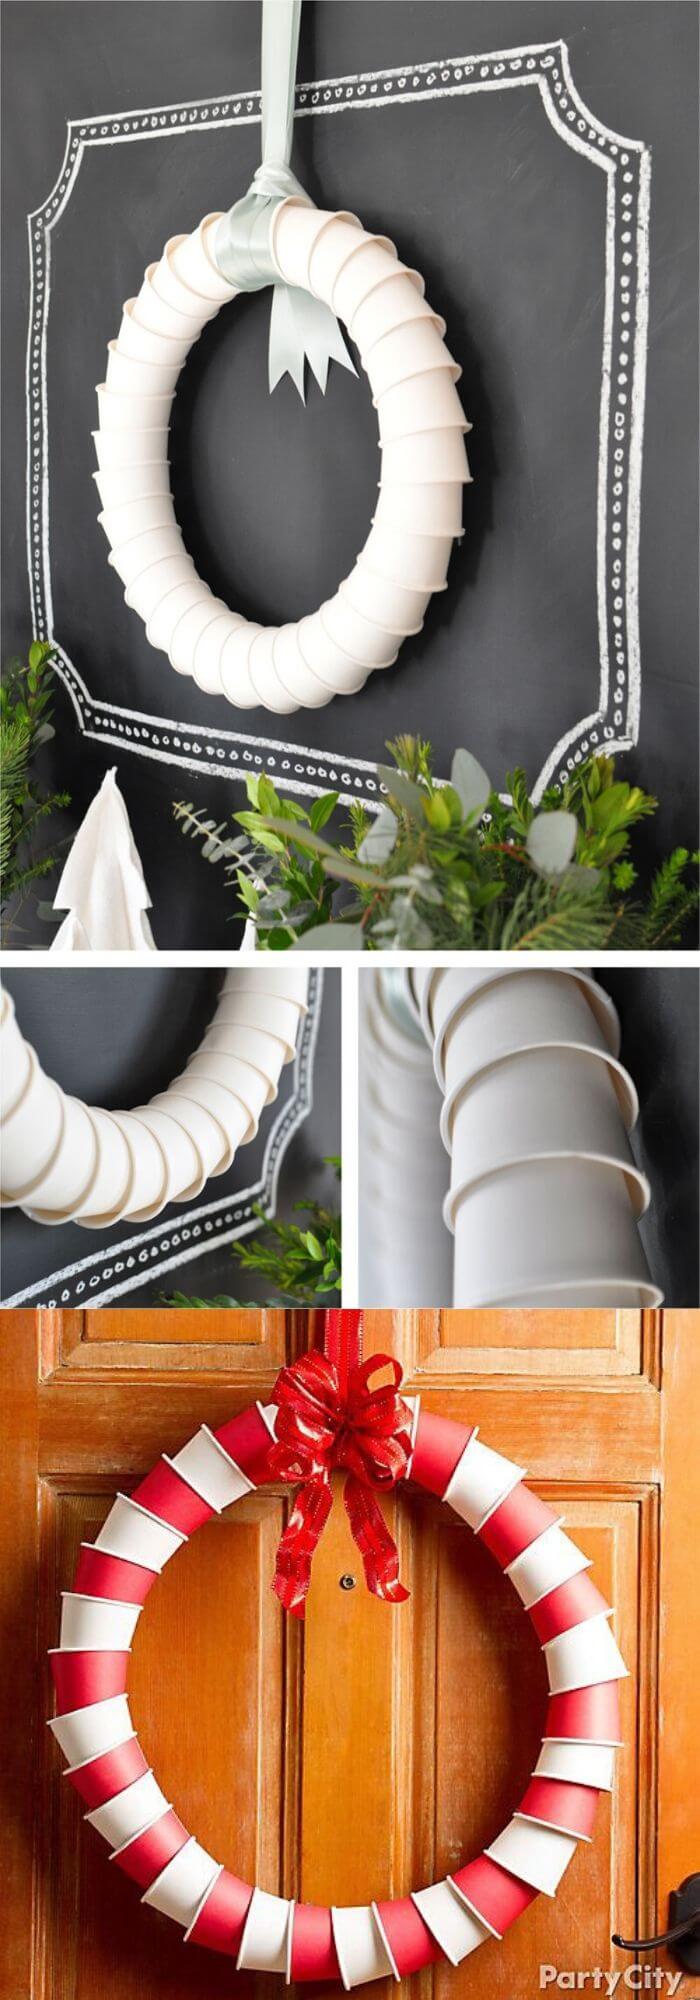 Paper Cup Wreath